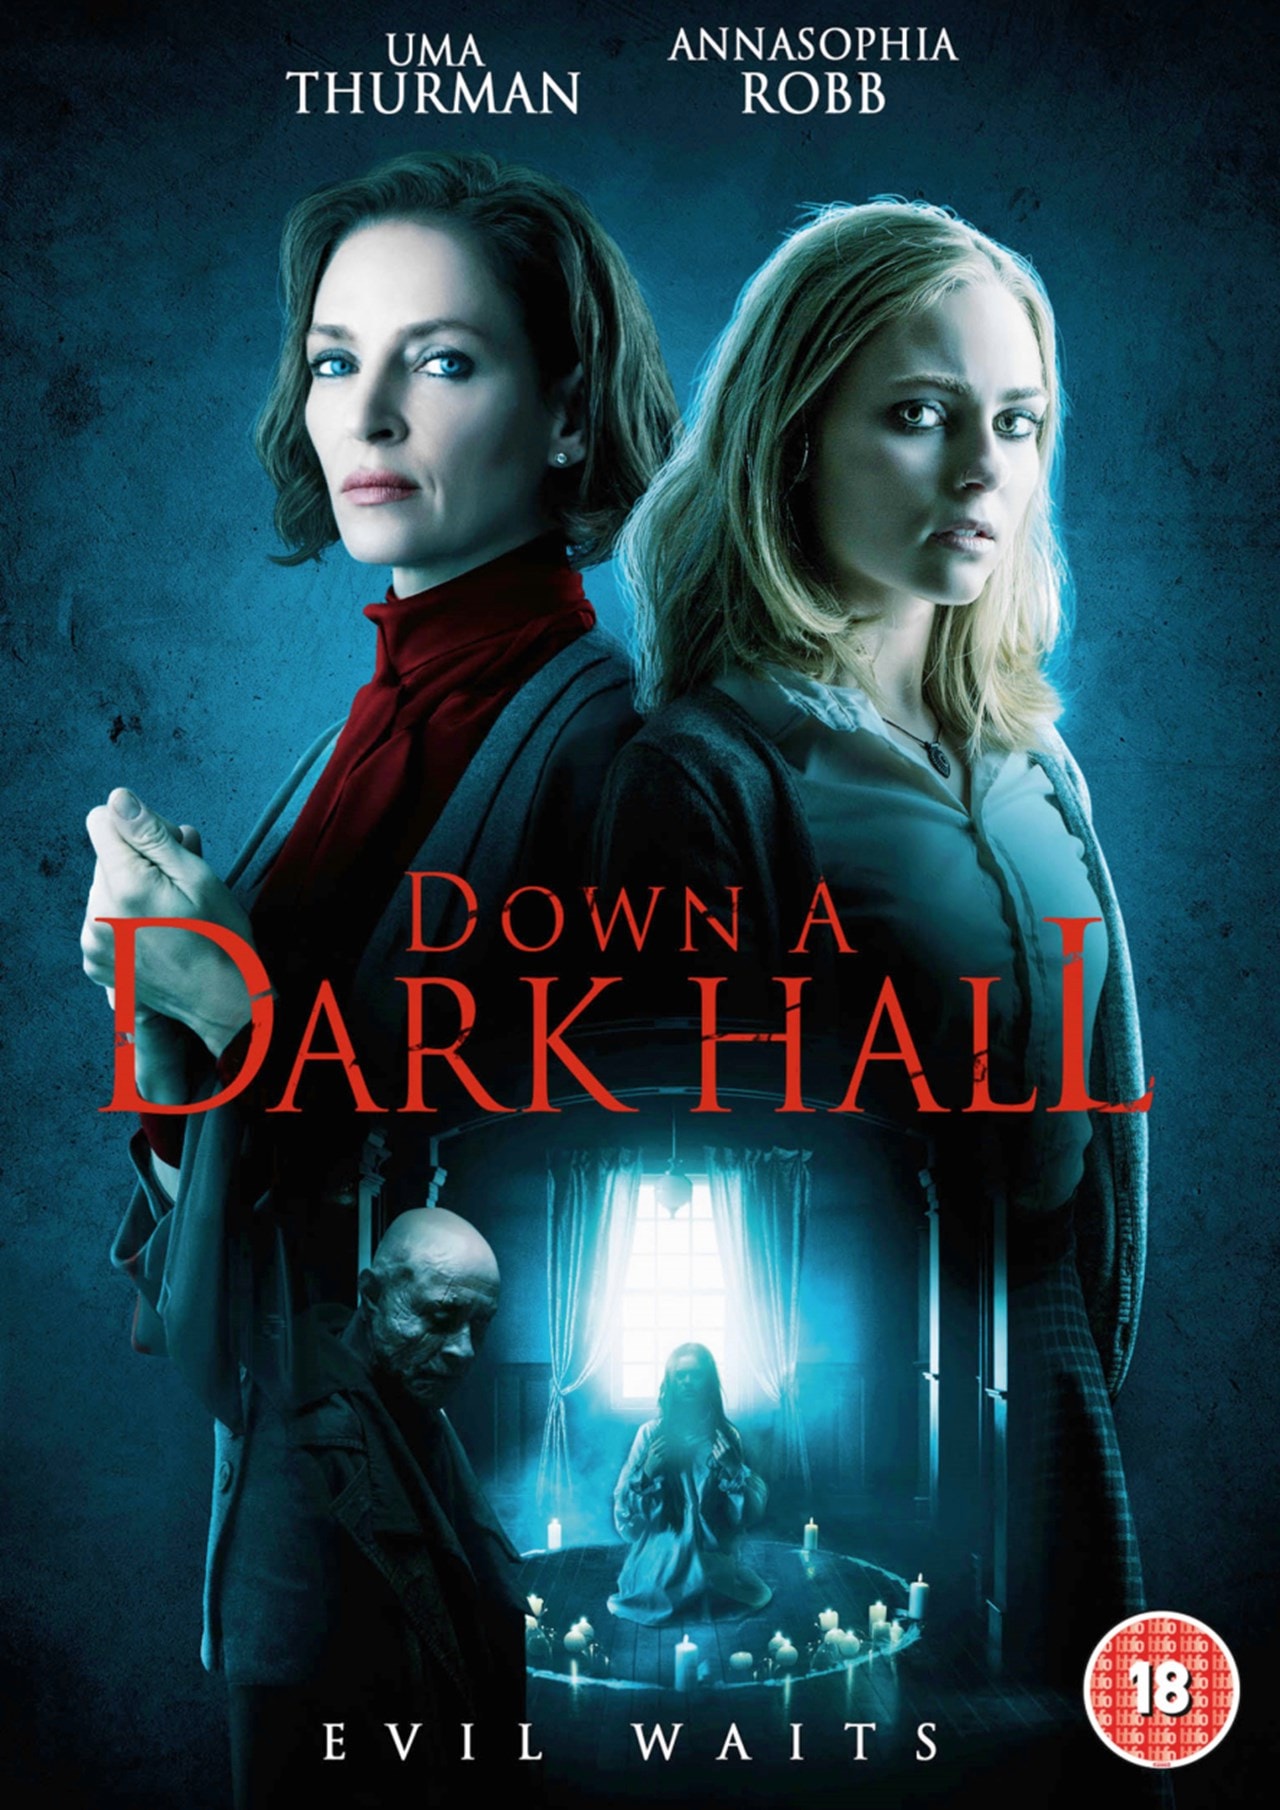 Down a Dark Hall | DVD | Free shipping over £20 | HMV Store